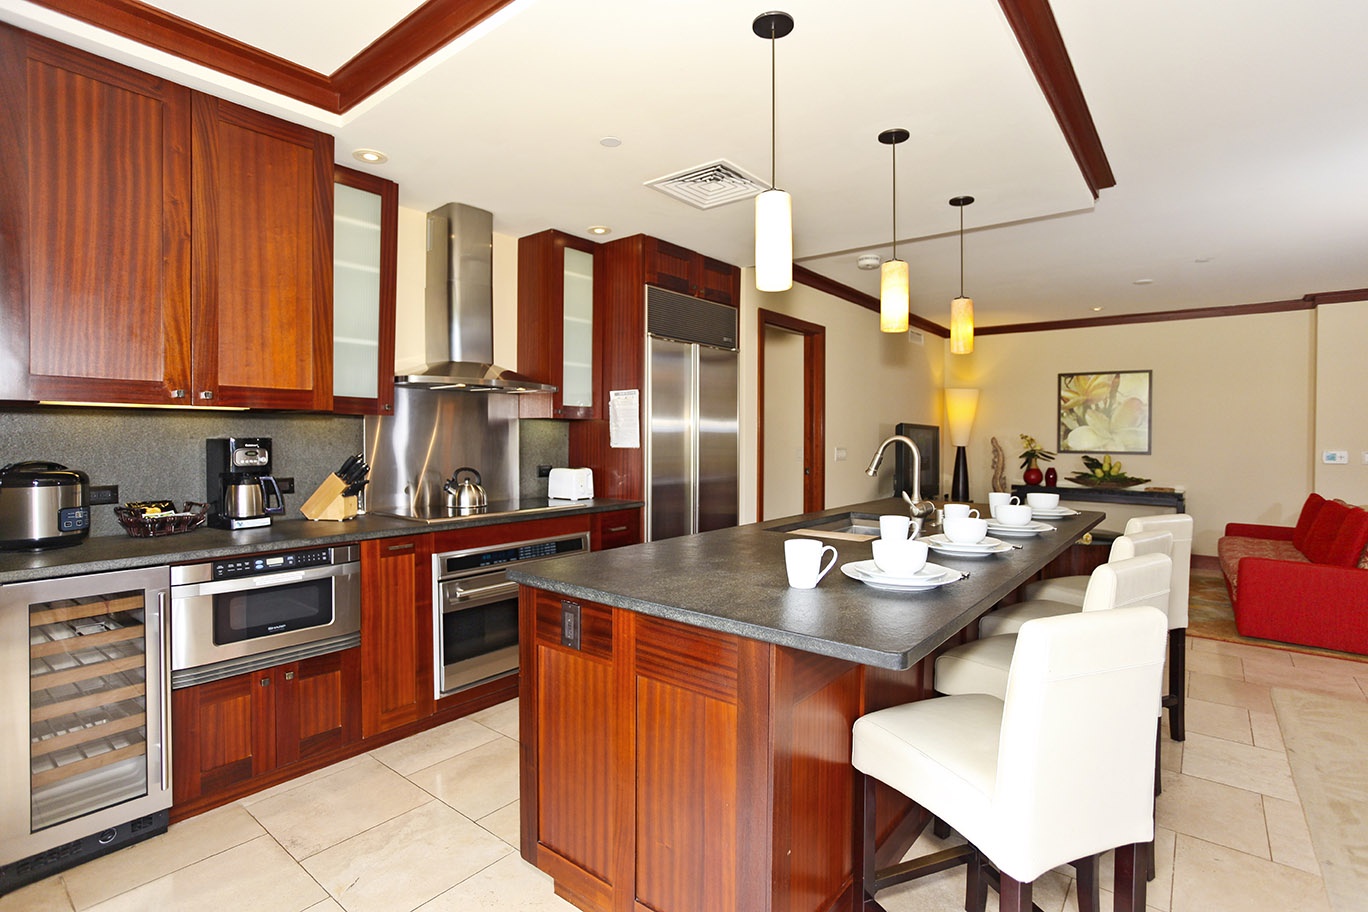 Kapolei Vacation Rentals, Ko Olina Beach Villas B204 - A Roy Yamaguci designed full Kitchen with stainless steel appliances and pendant lights.